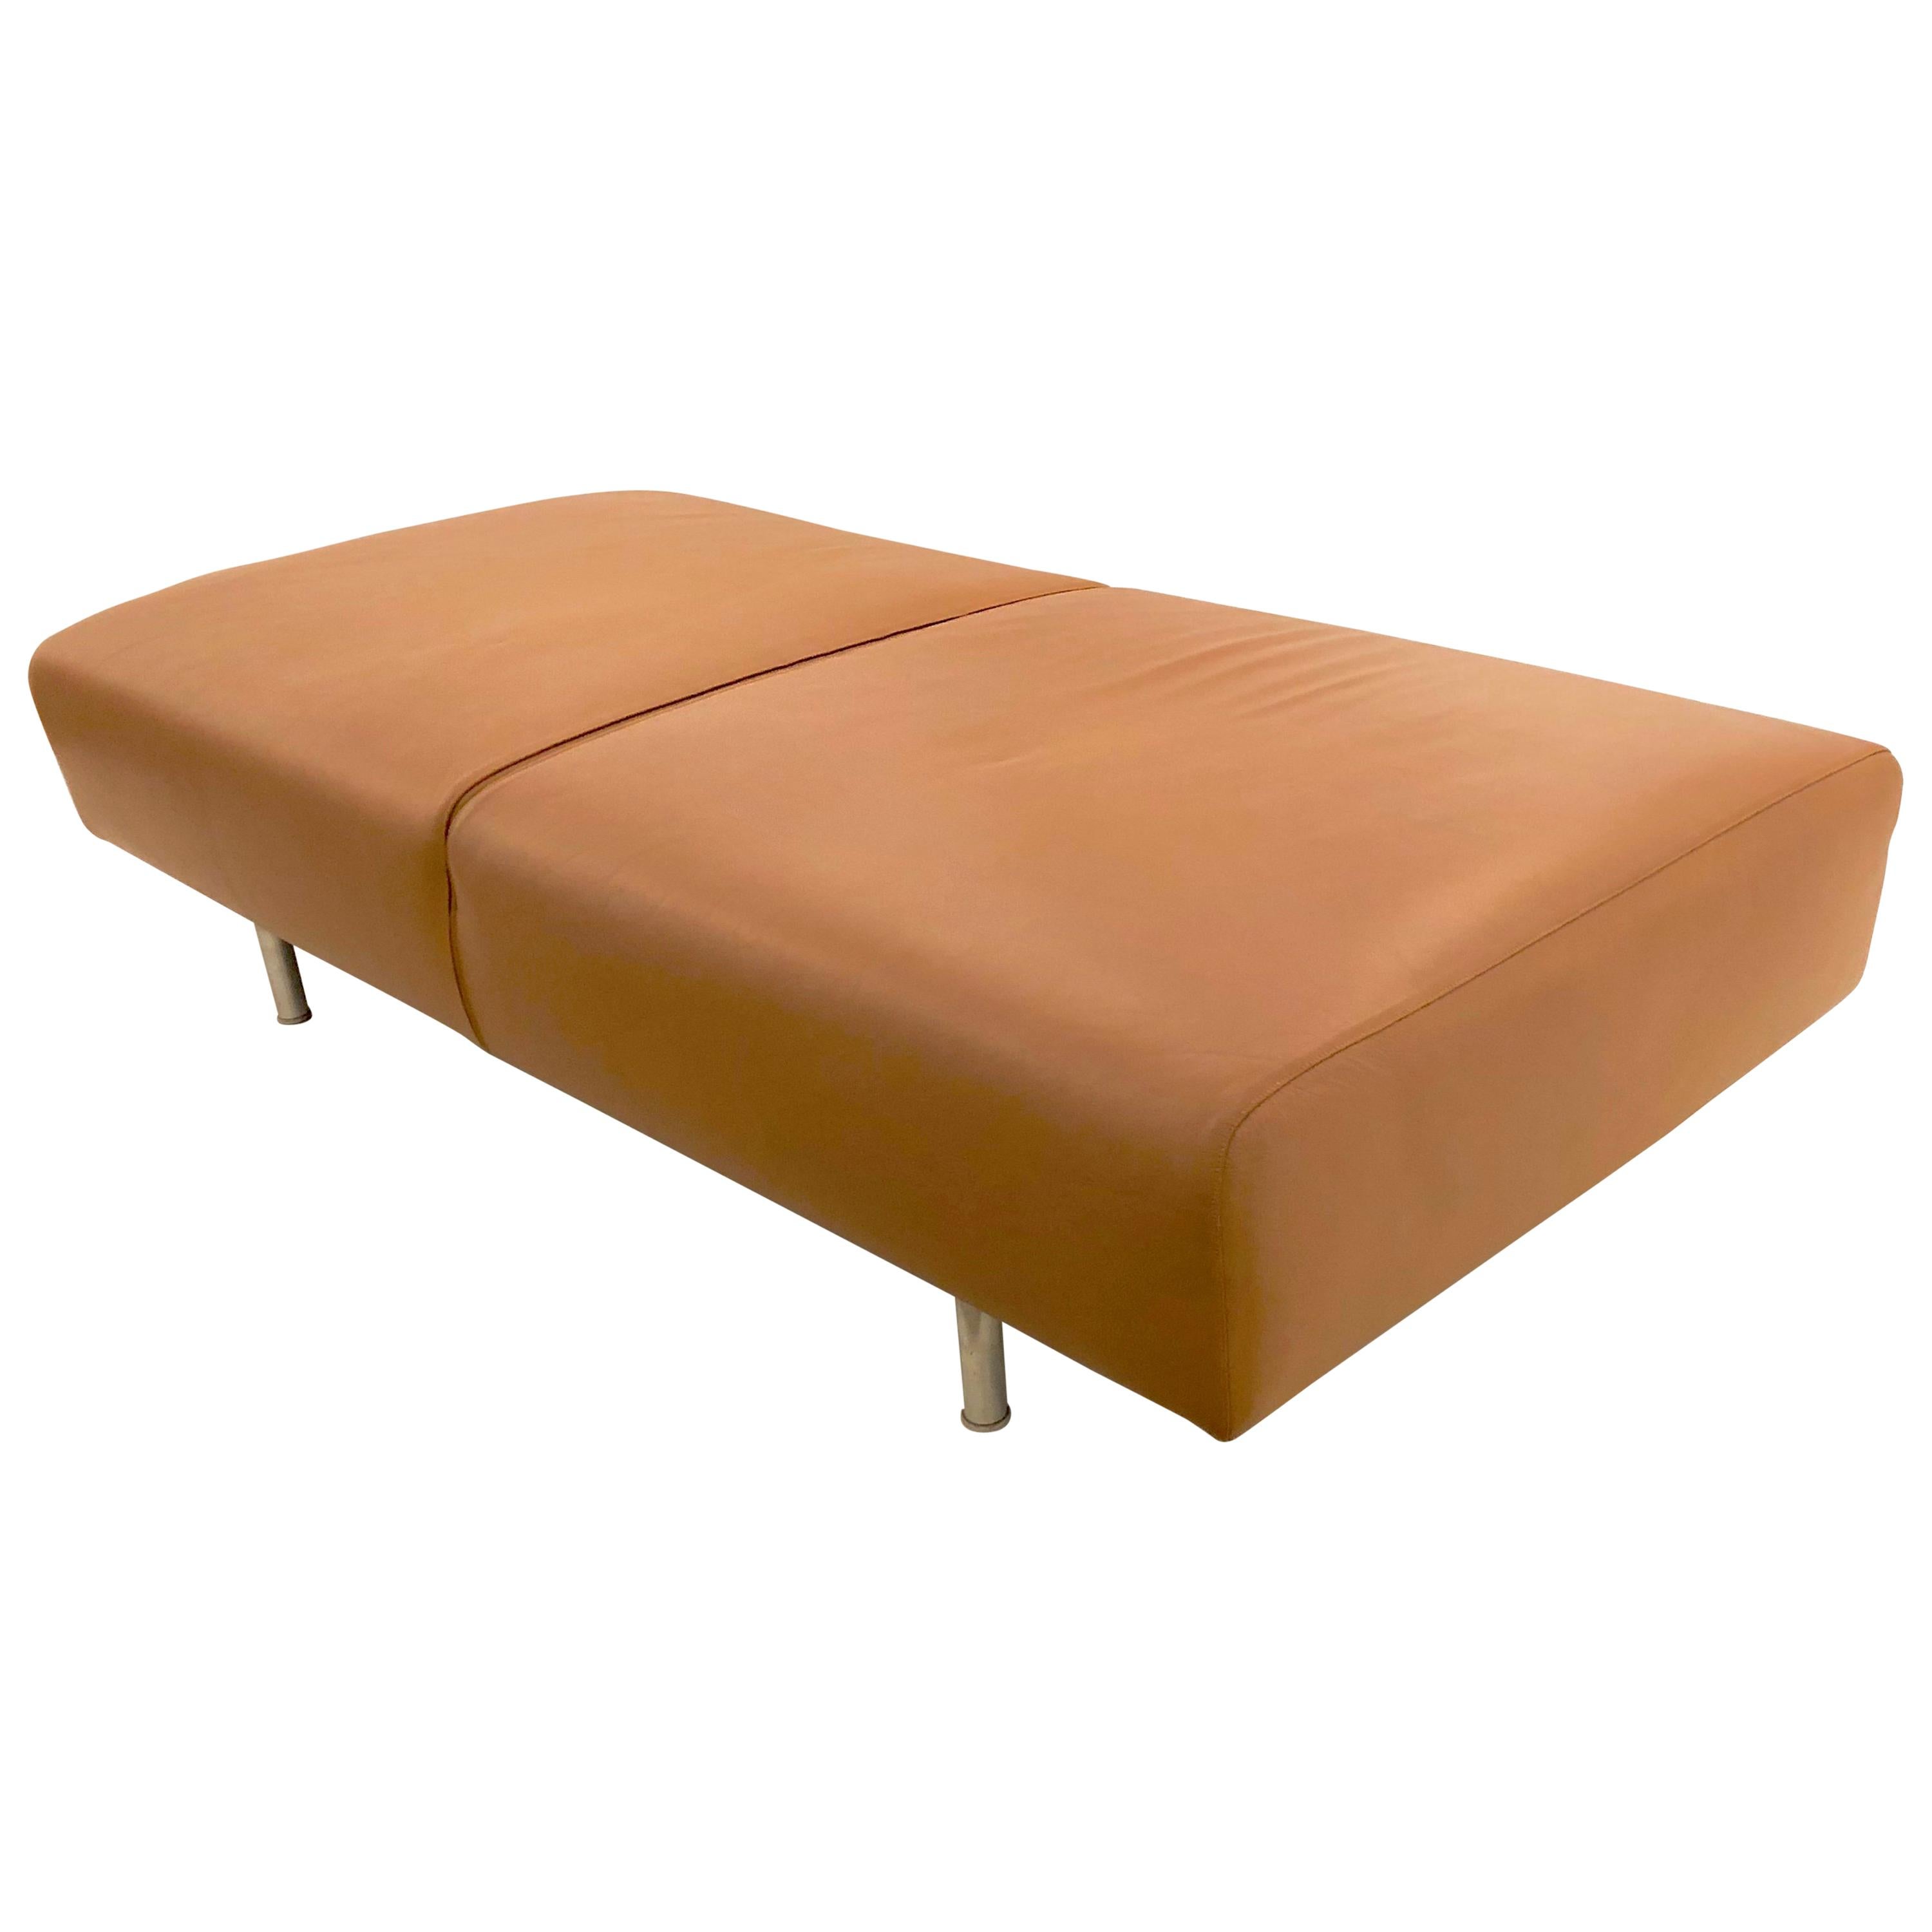 Met Divano Ottoman/ Low Bench by Piero Lissoni for Cassina